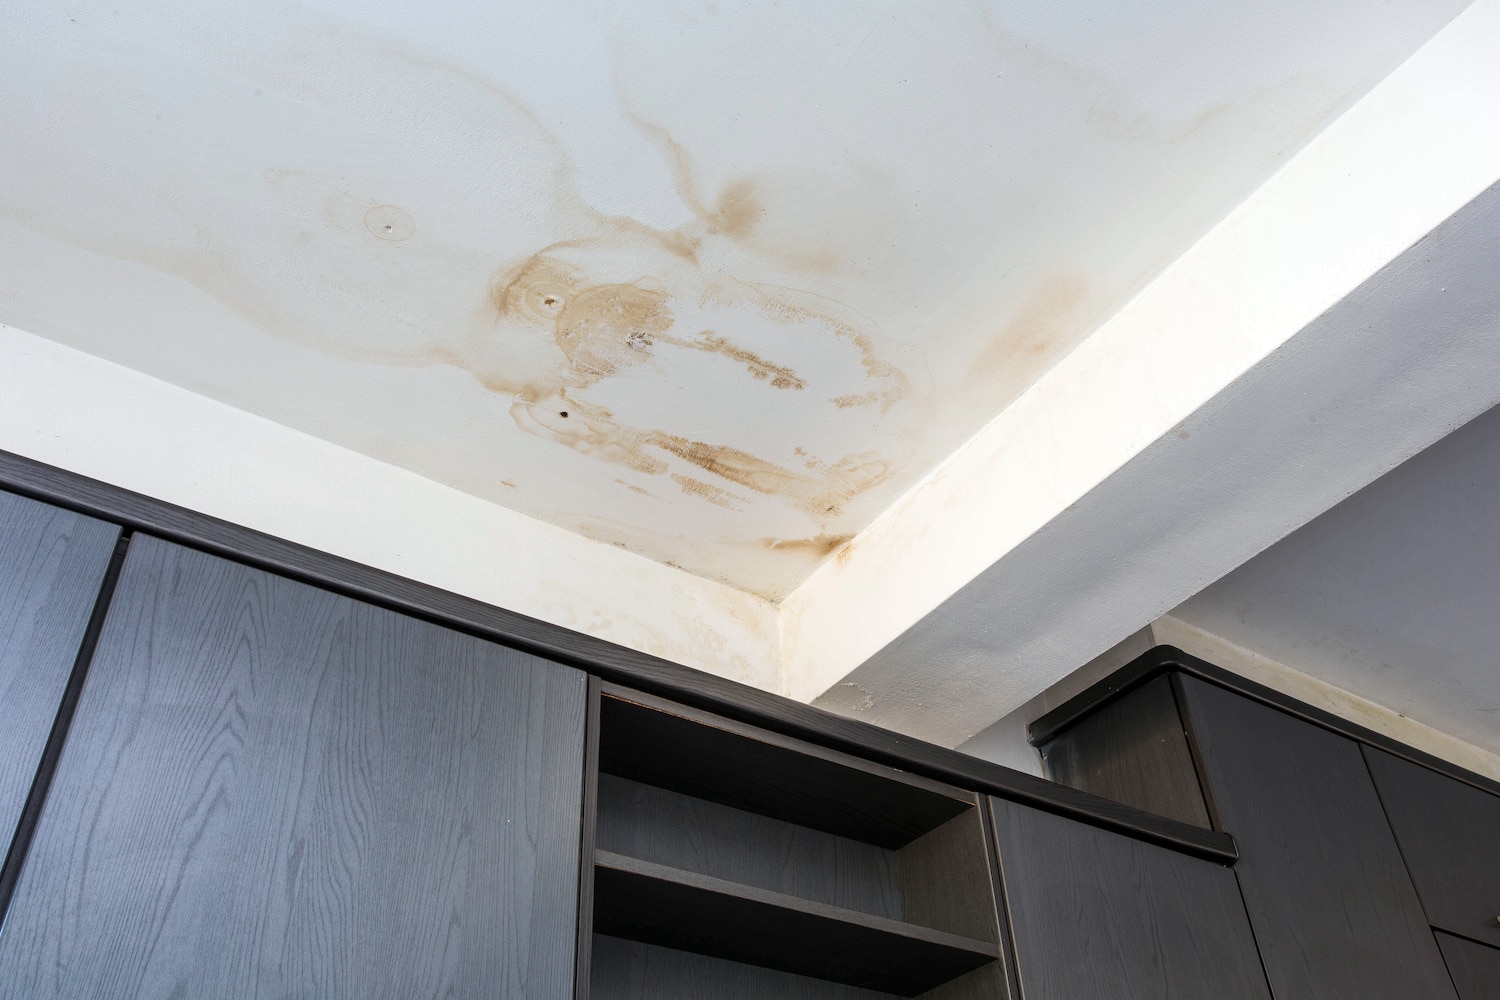 Water leak damage on home ceiling